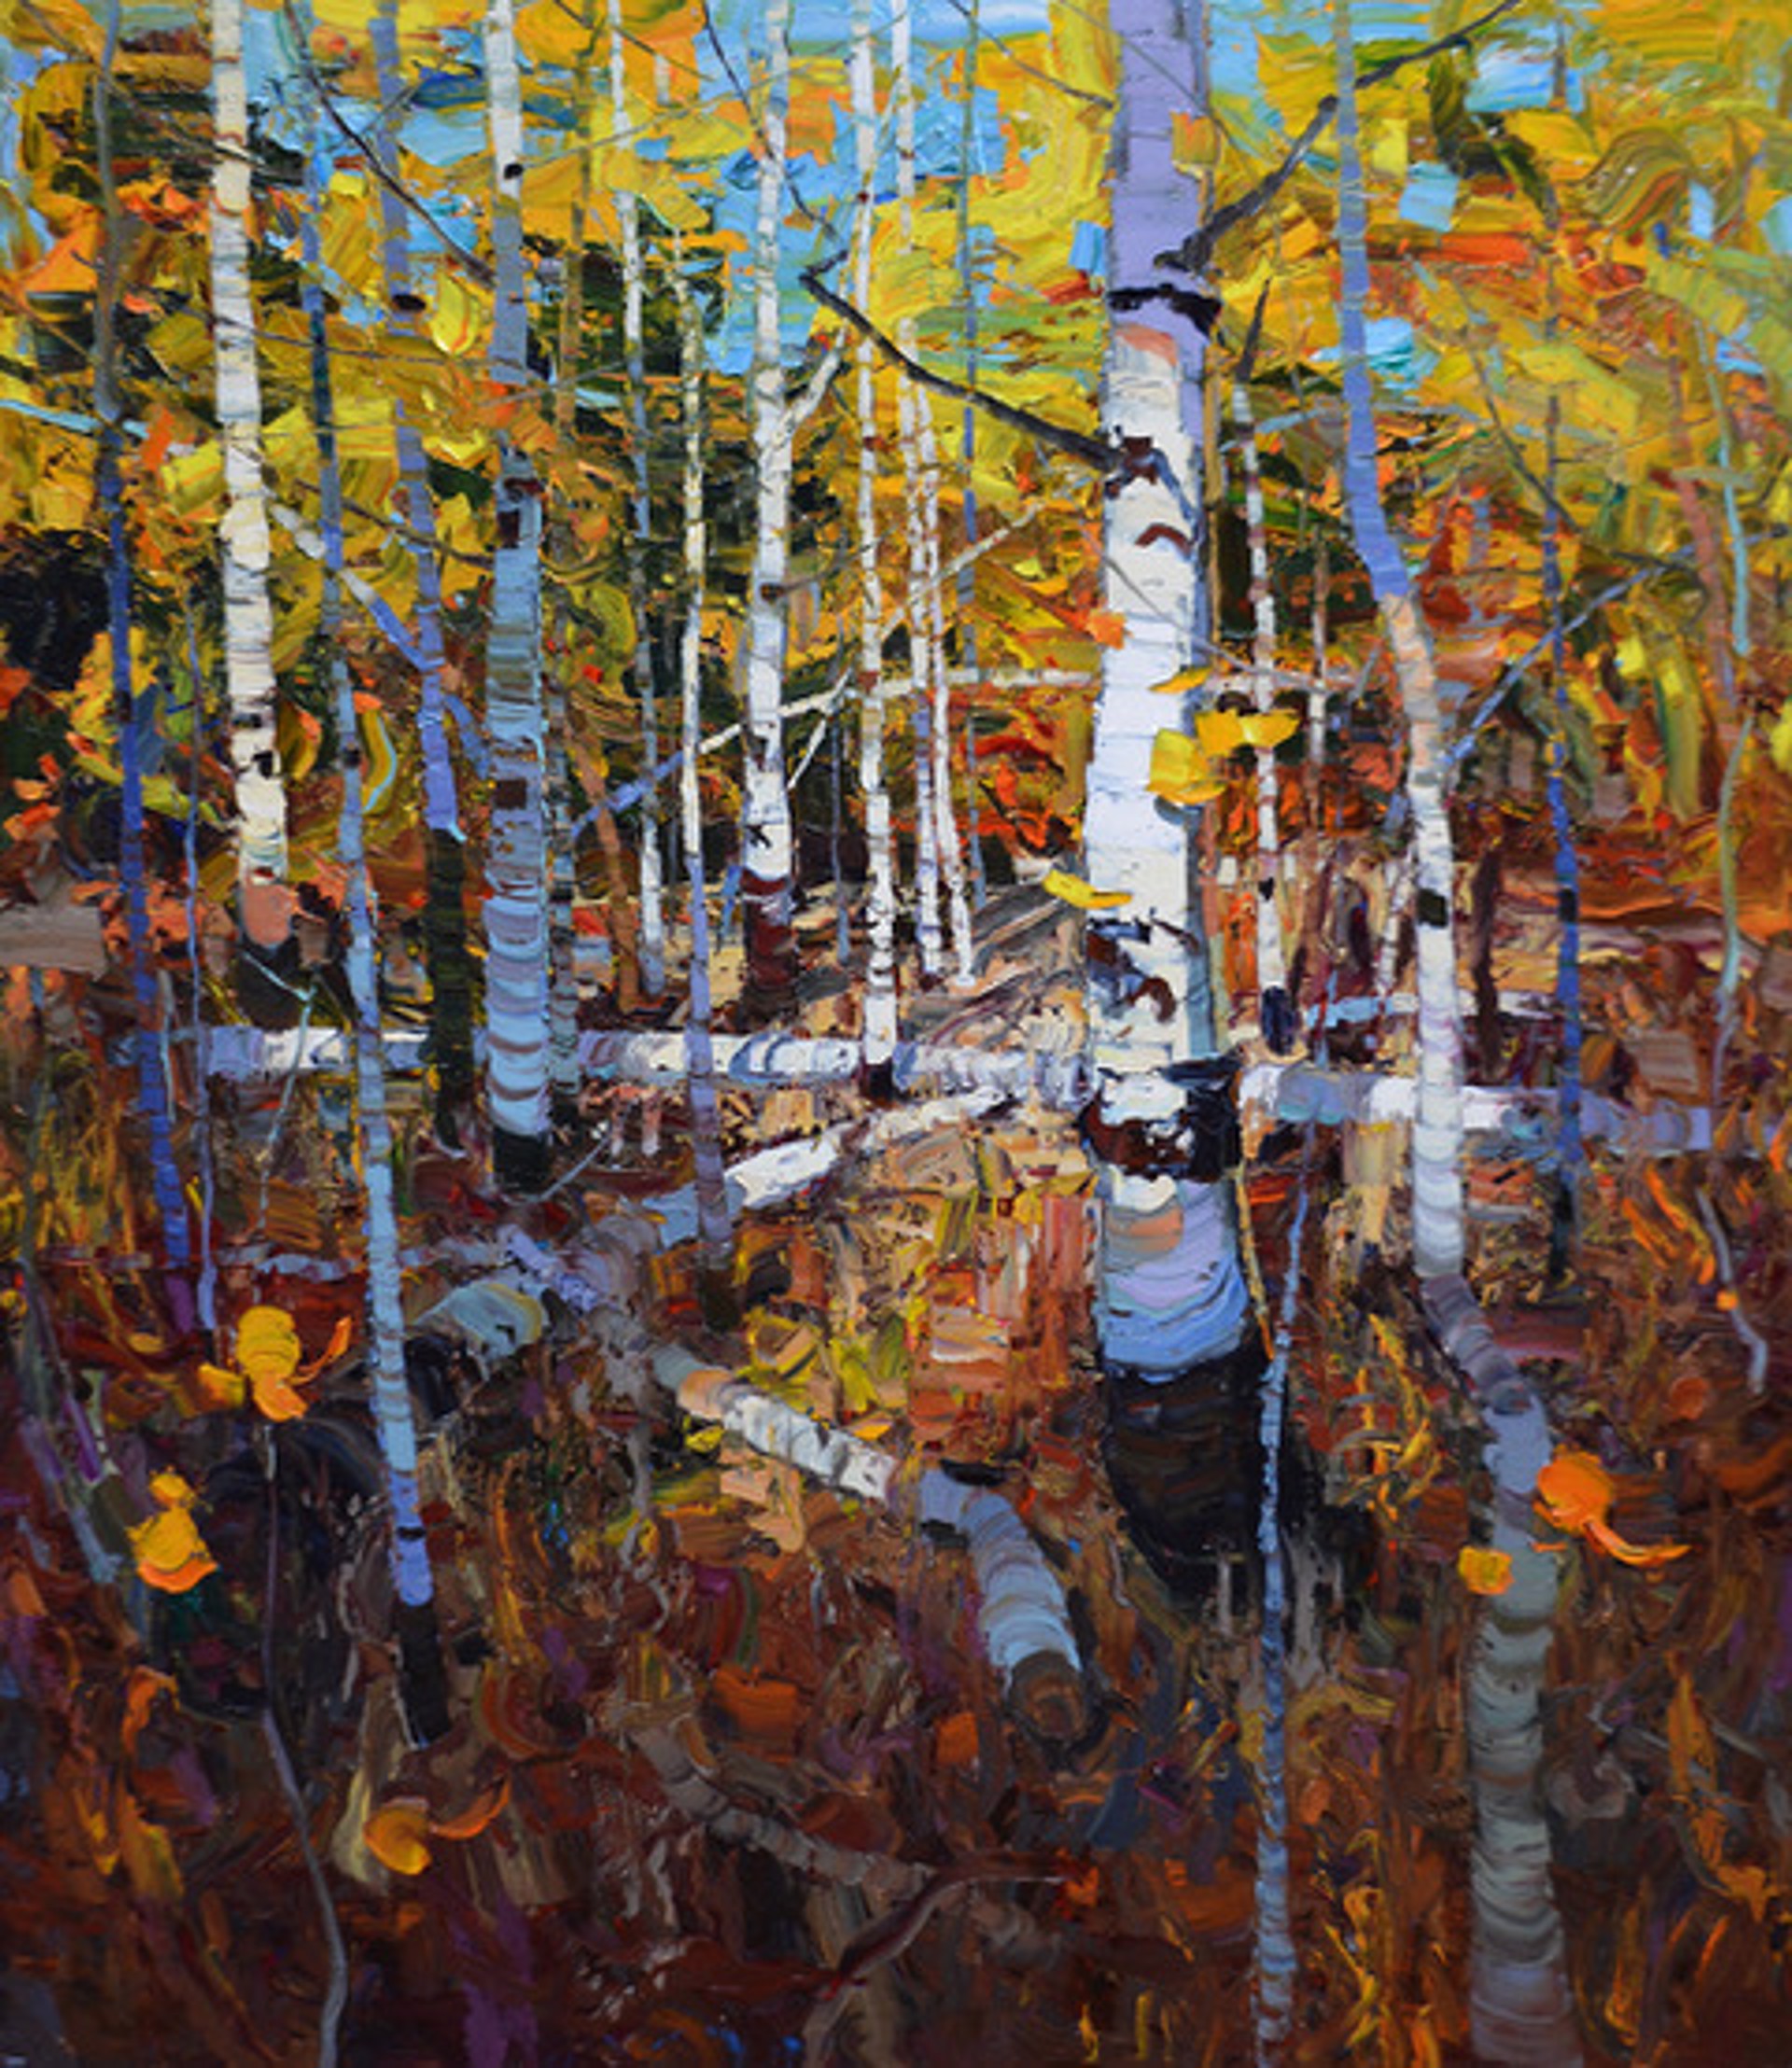 Contemporary Oil On Canvas Painting Of Autumn Or Fall Aspens With Yellow And Orange By Silas Thompson Available At Gallery Wild